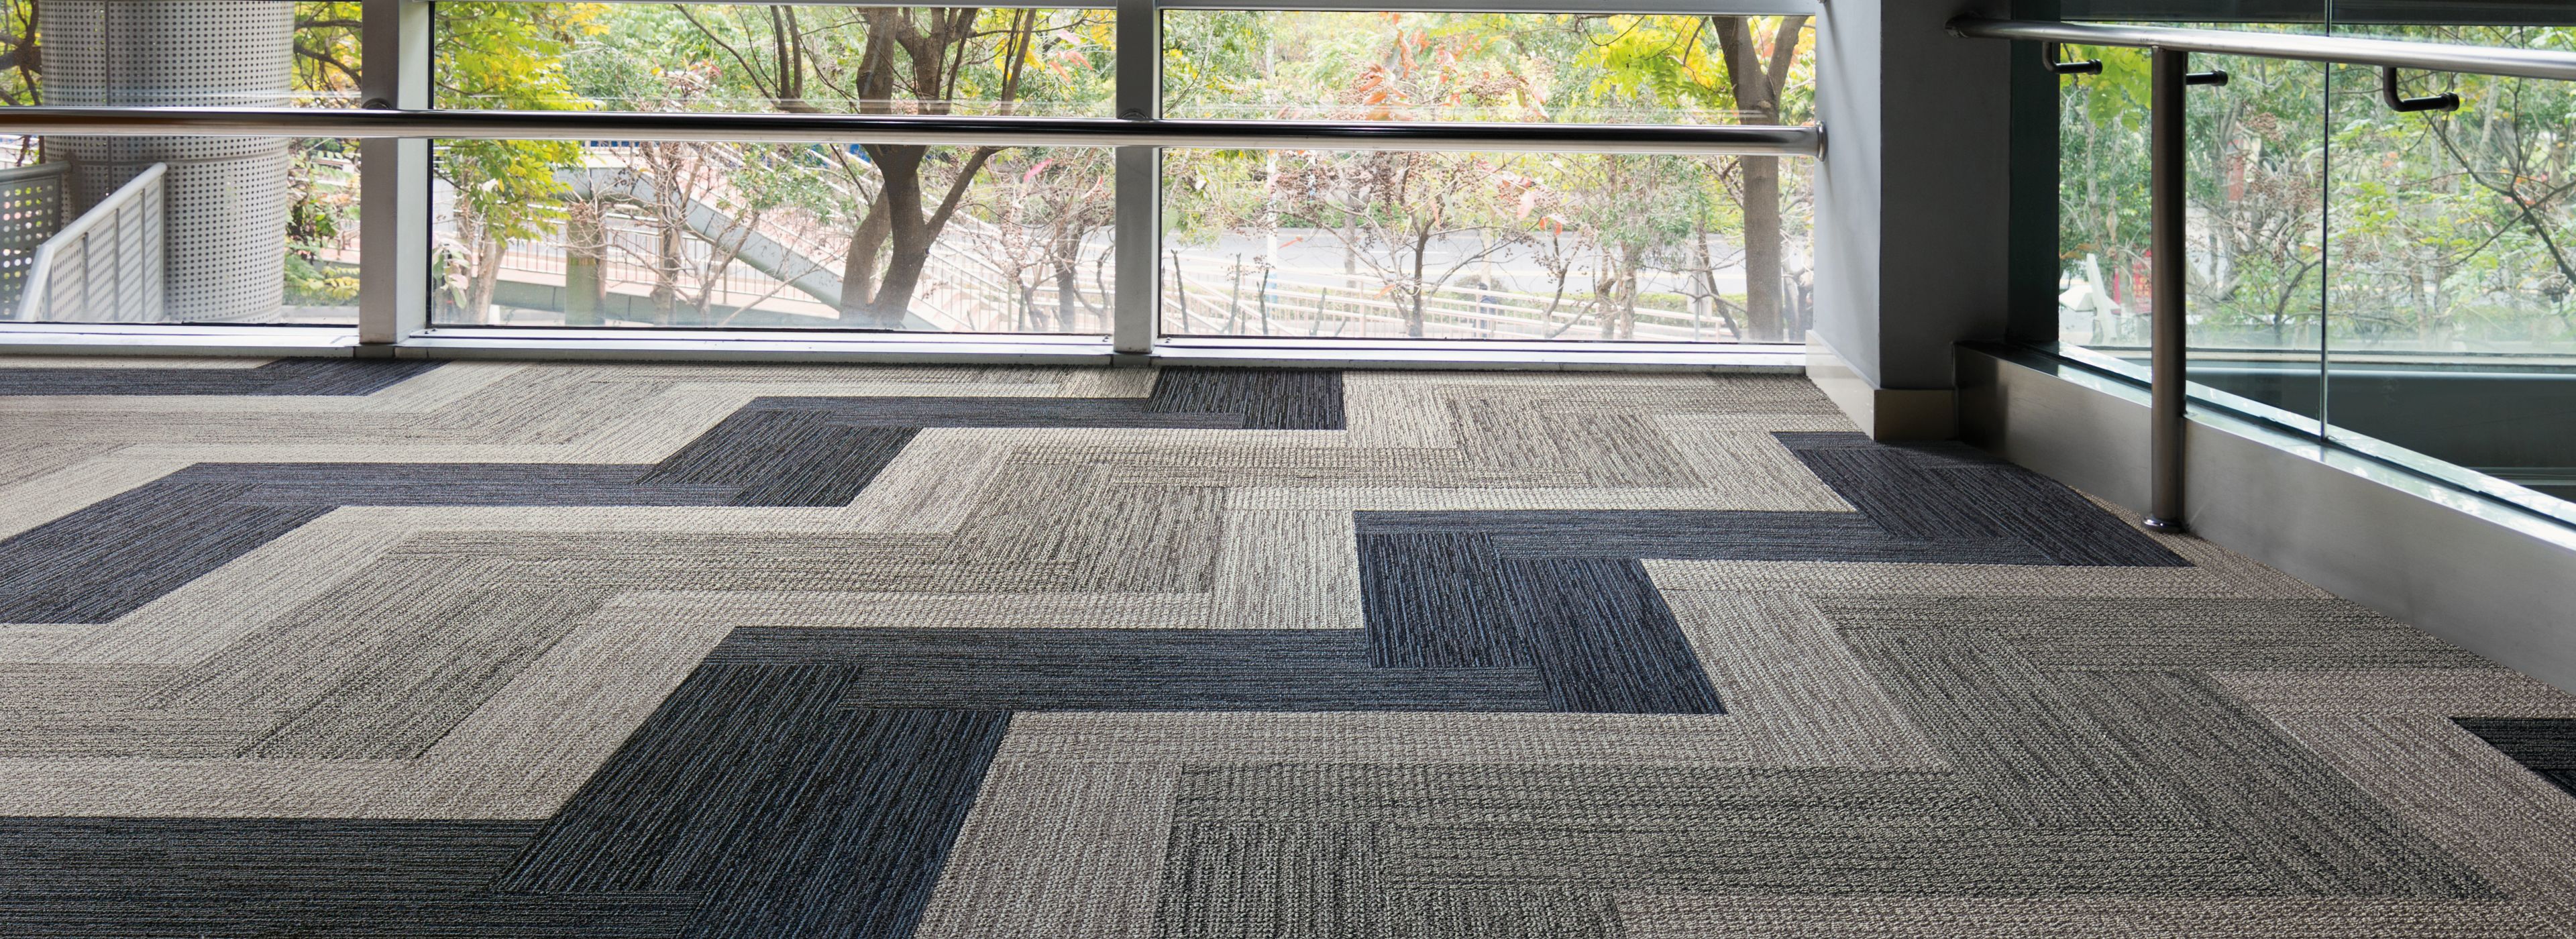 Interface Afternoon Light and Winter Sun carpet tile in open area with glass walls imagen número 1